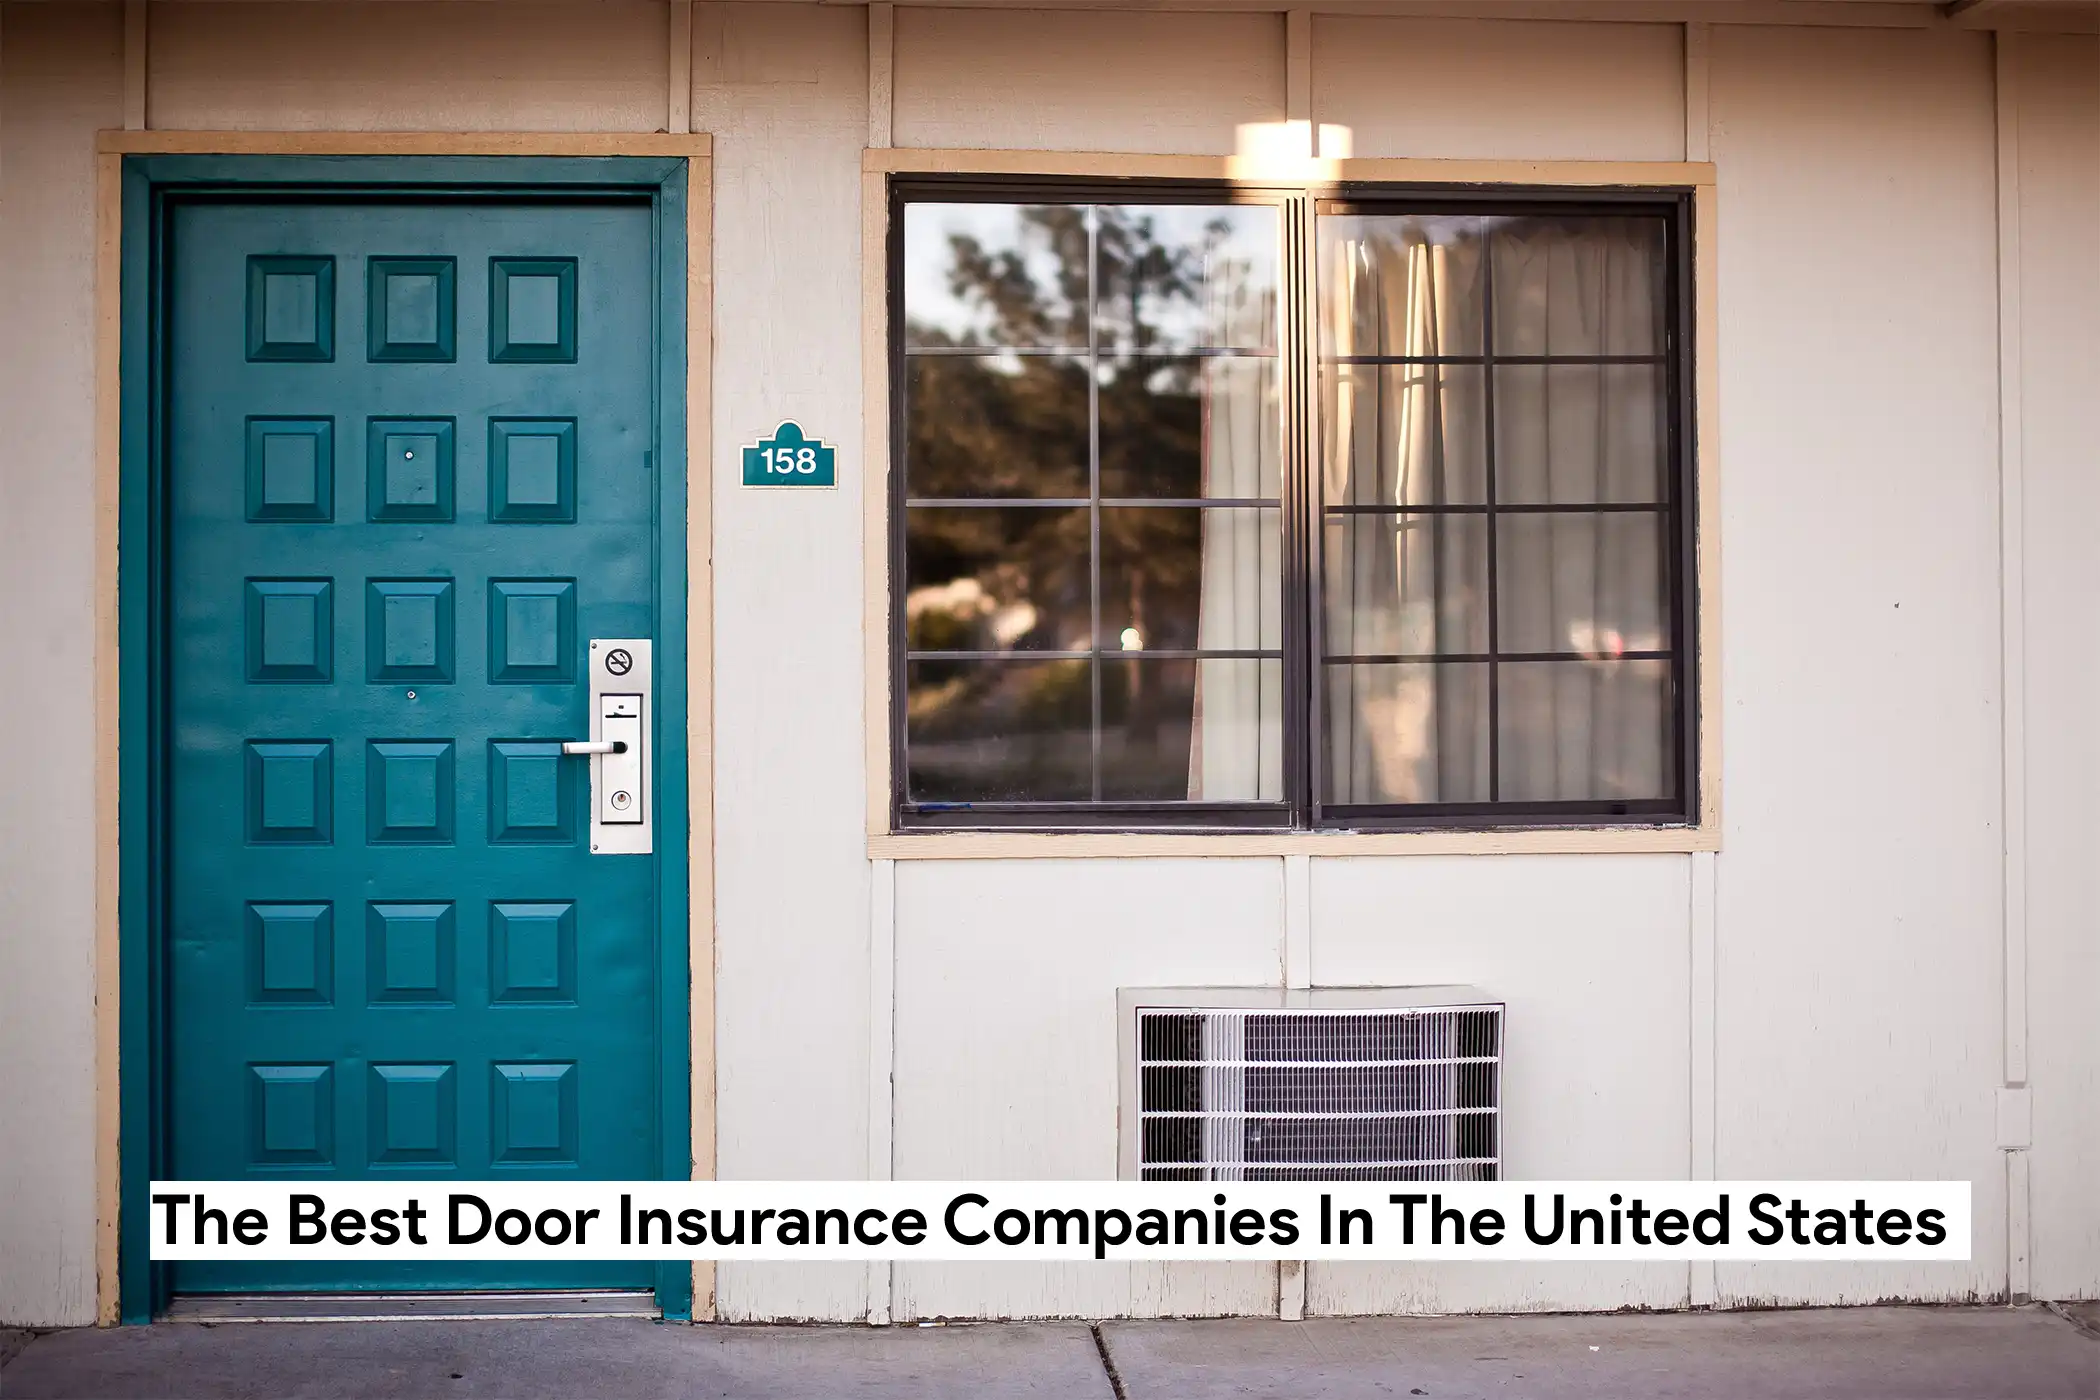 The Best Door Insurance Companies In The United States